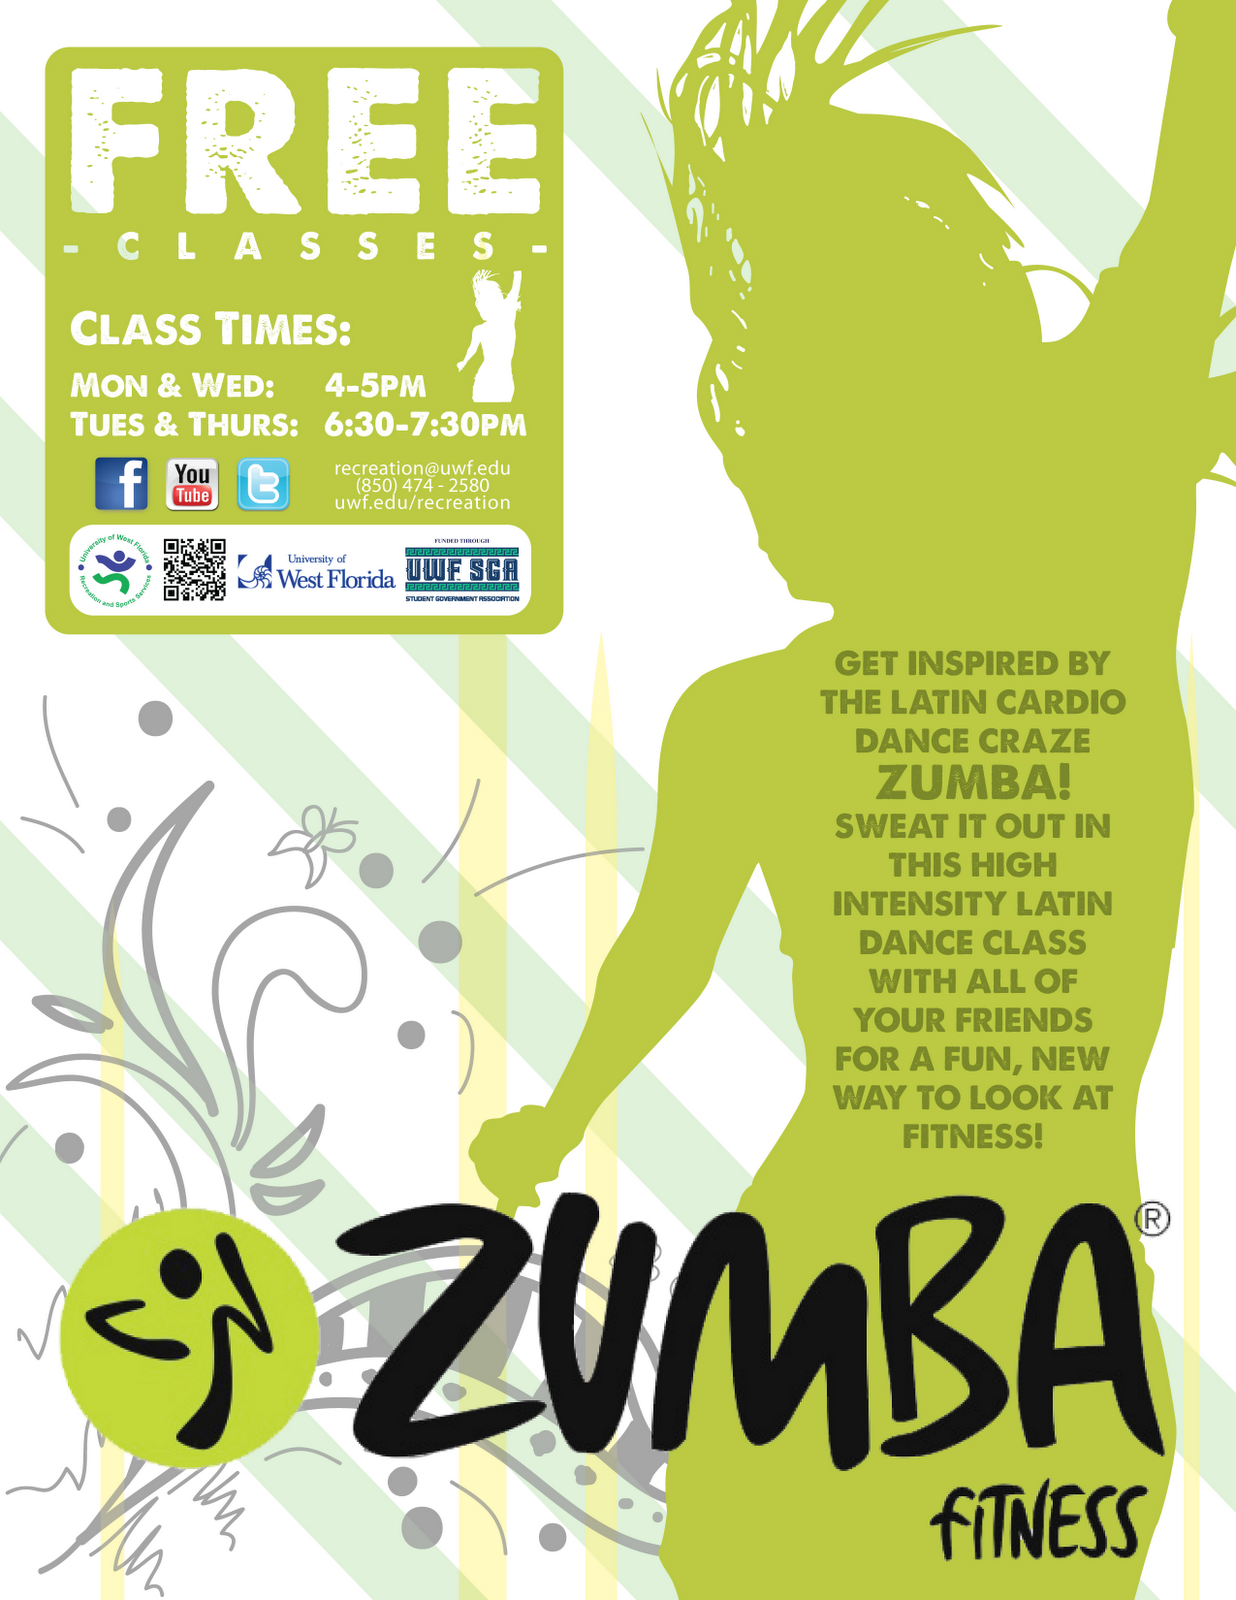 ART20L Internship - Recreation and Sports Services: January 20 Inside Zumba Flyer Template Free